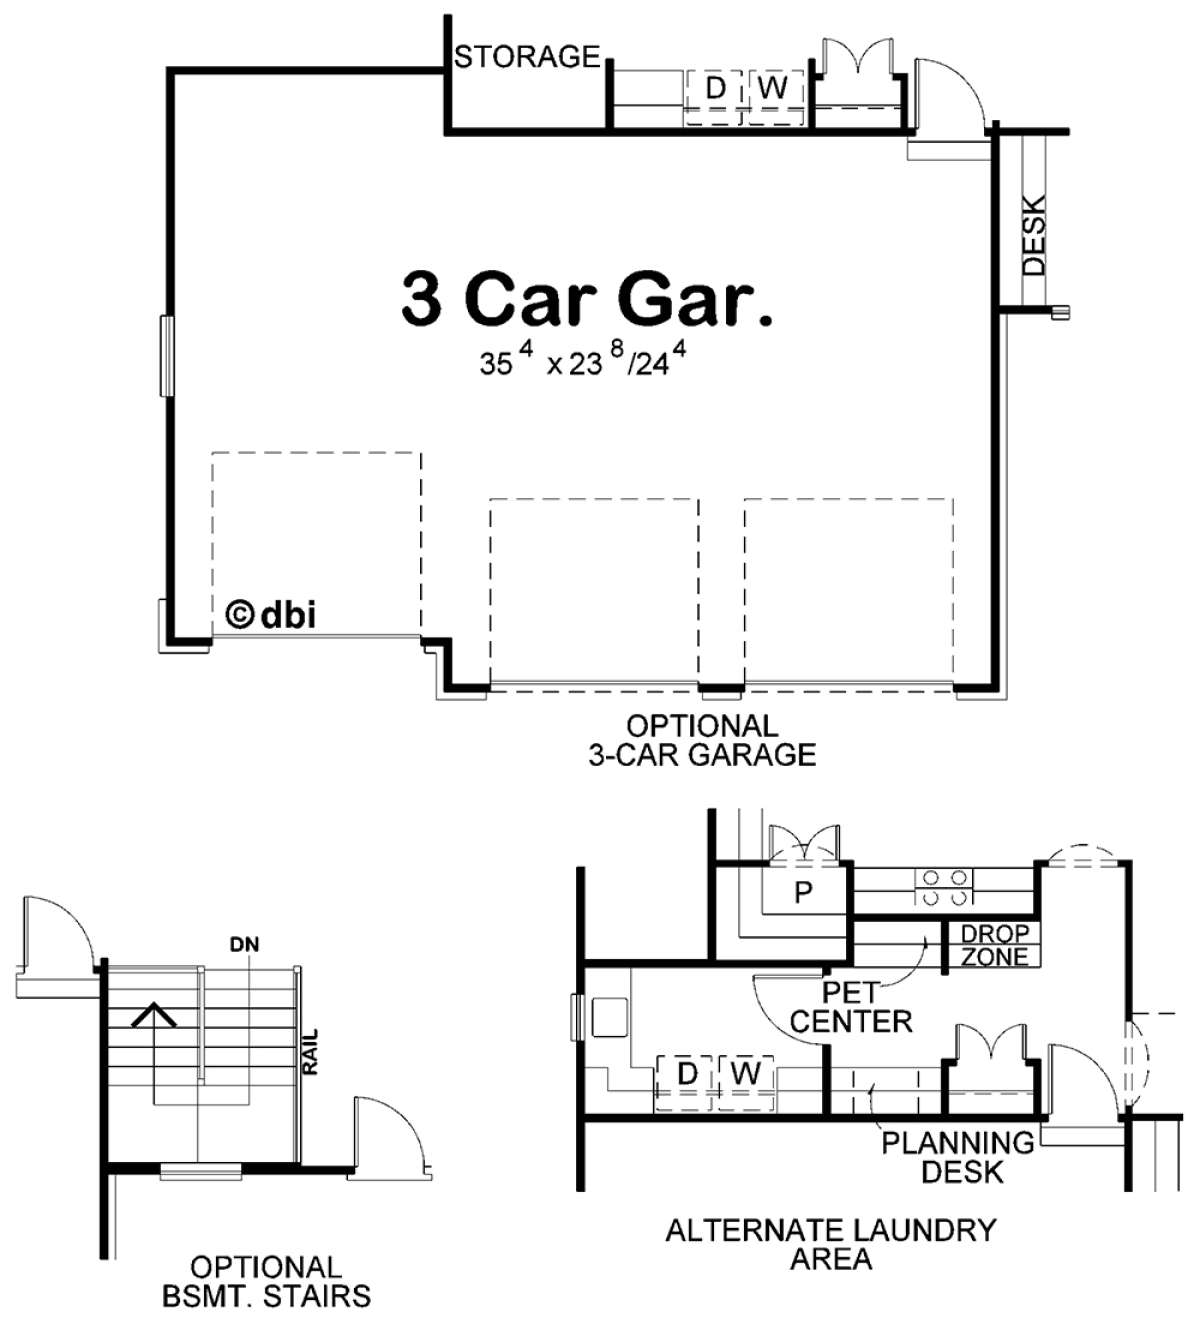 Garage, Alternate Laundry Area, Optional Basement Stairs for House Plan #402-01507